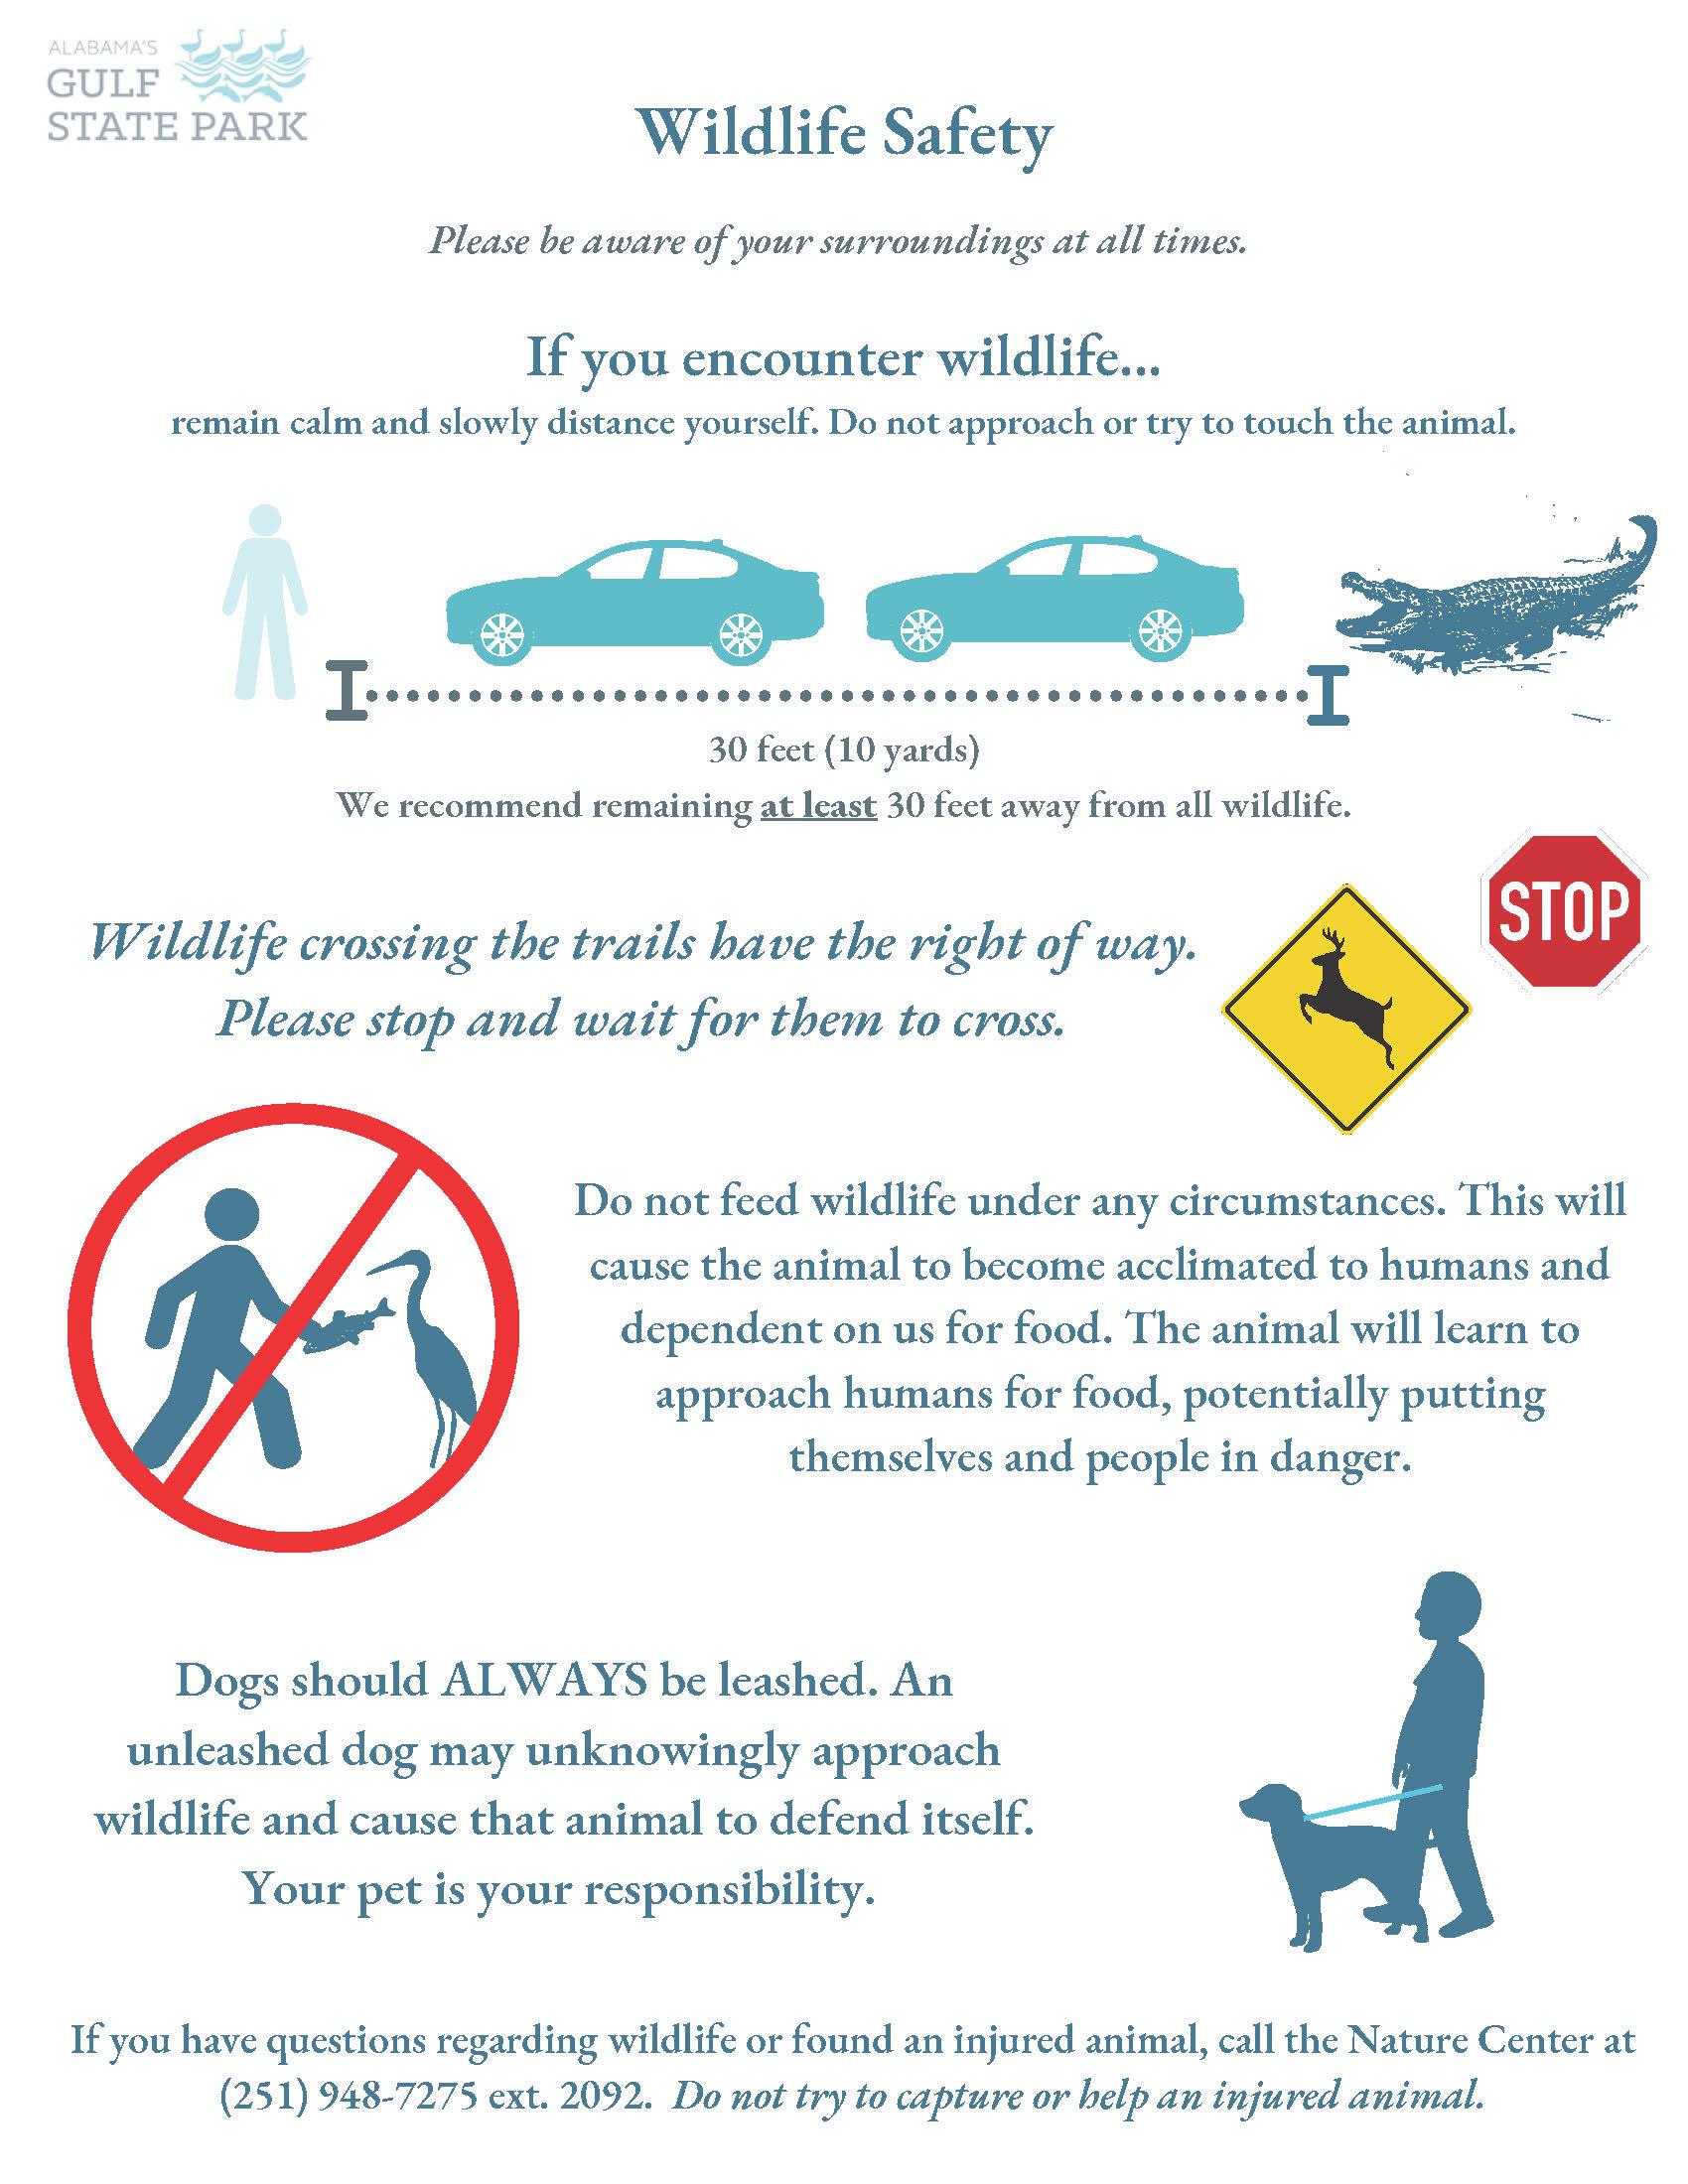 Wildlife Safety Flyer With Information on Encountering Wildlife